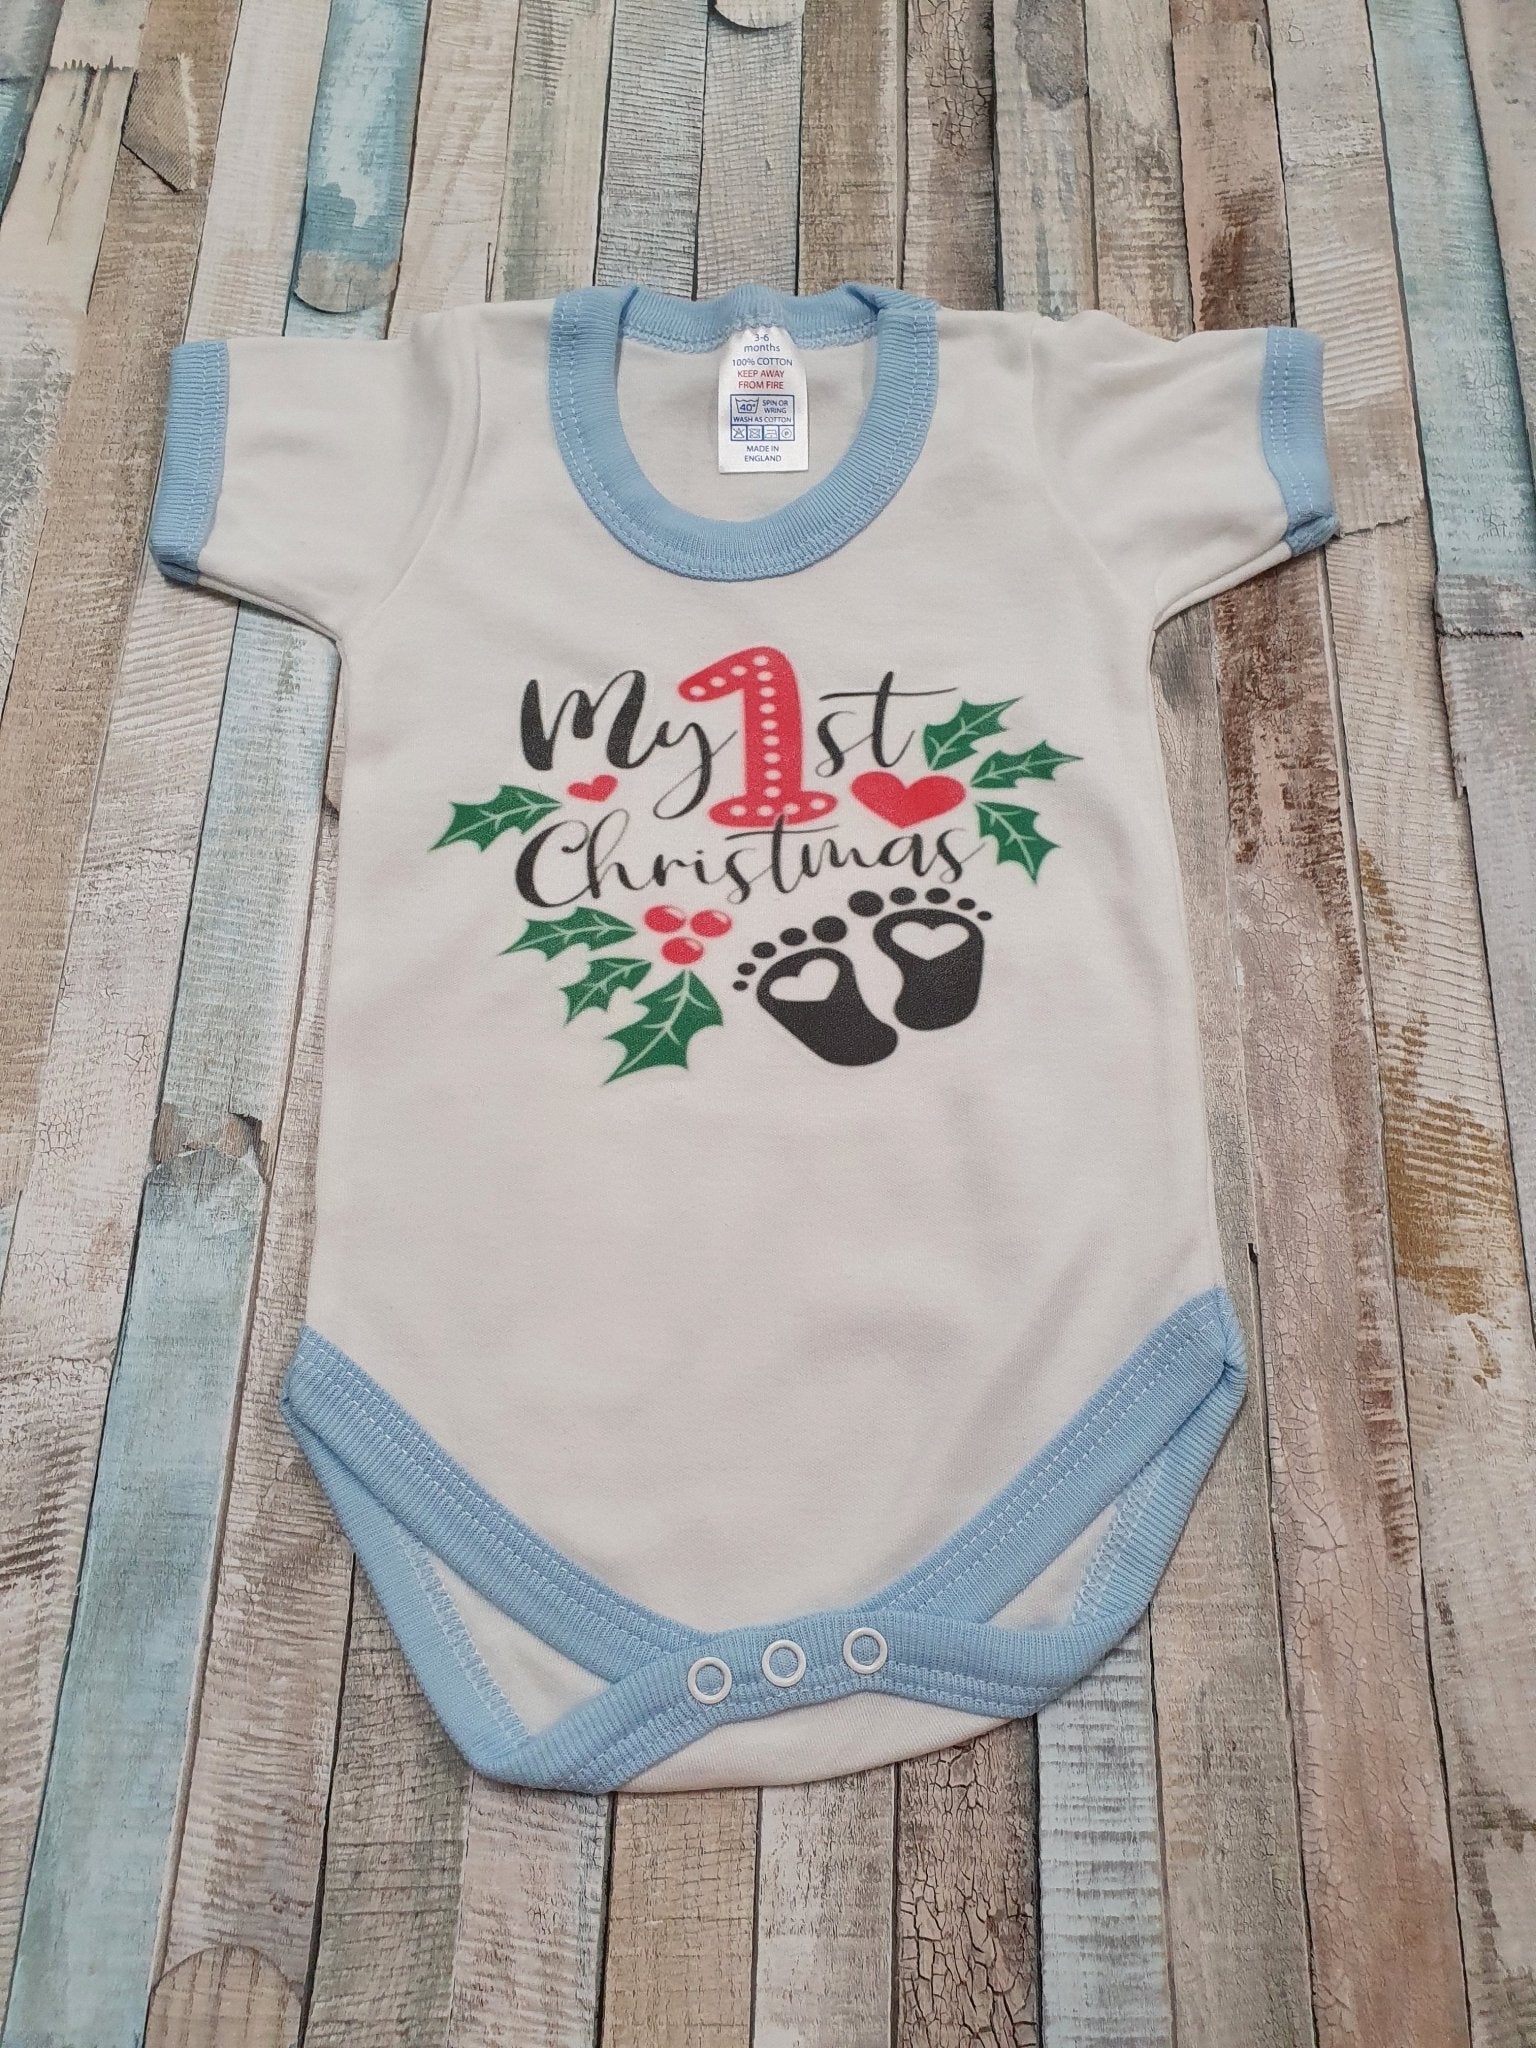 My First Christmas Vest - Nana B Baby & Childrenswear Boutique